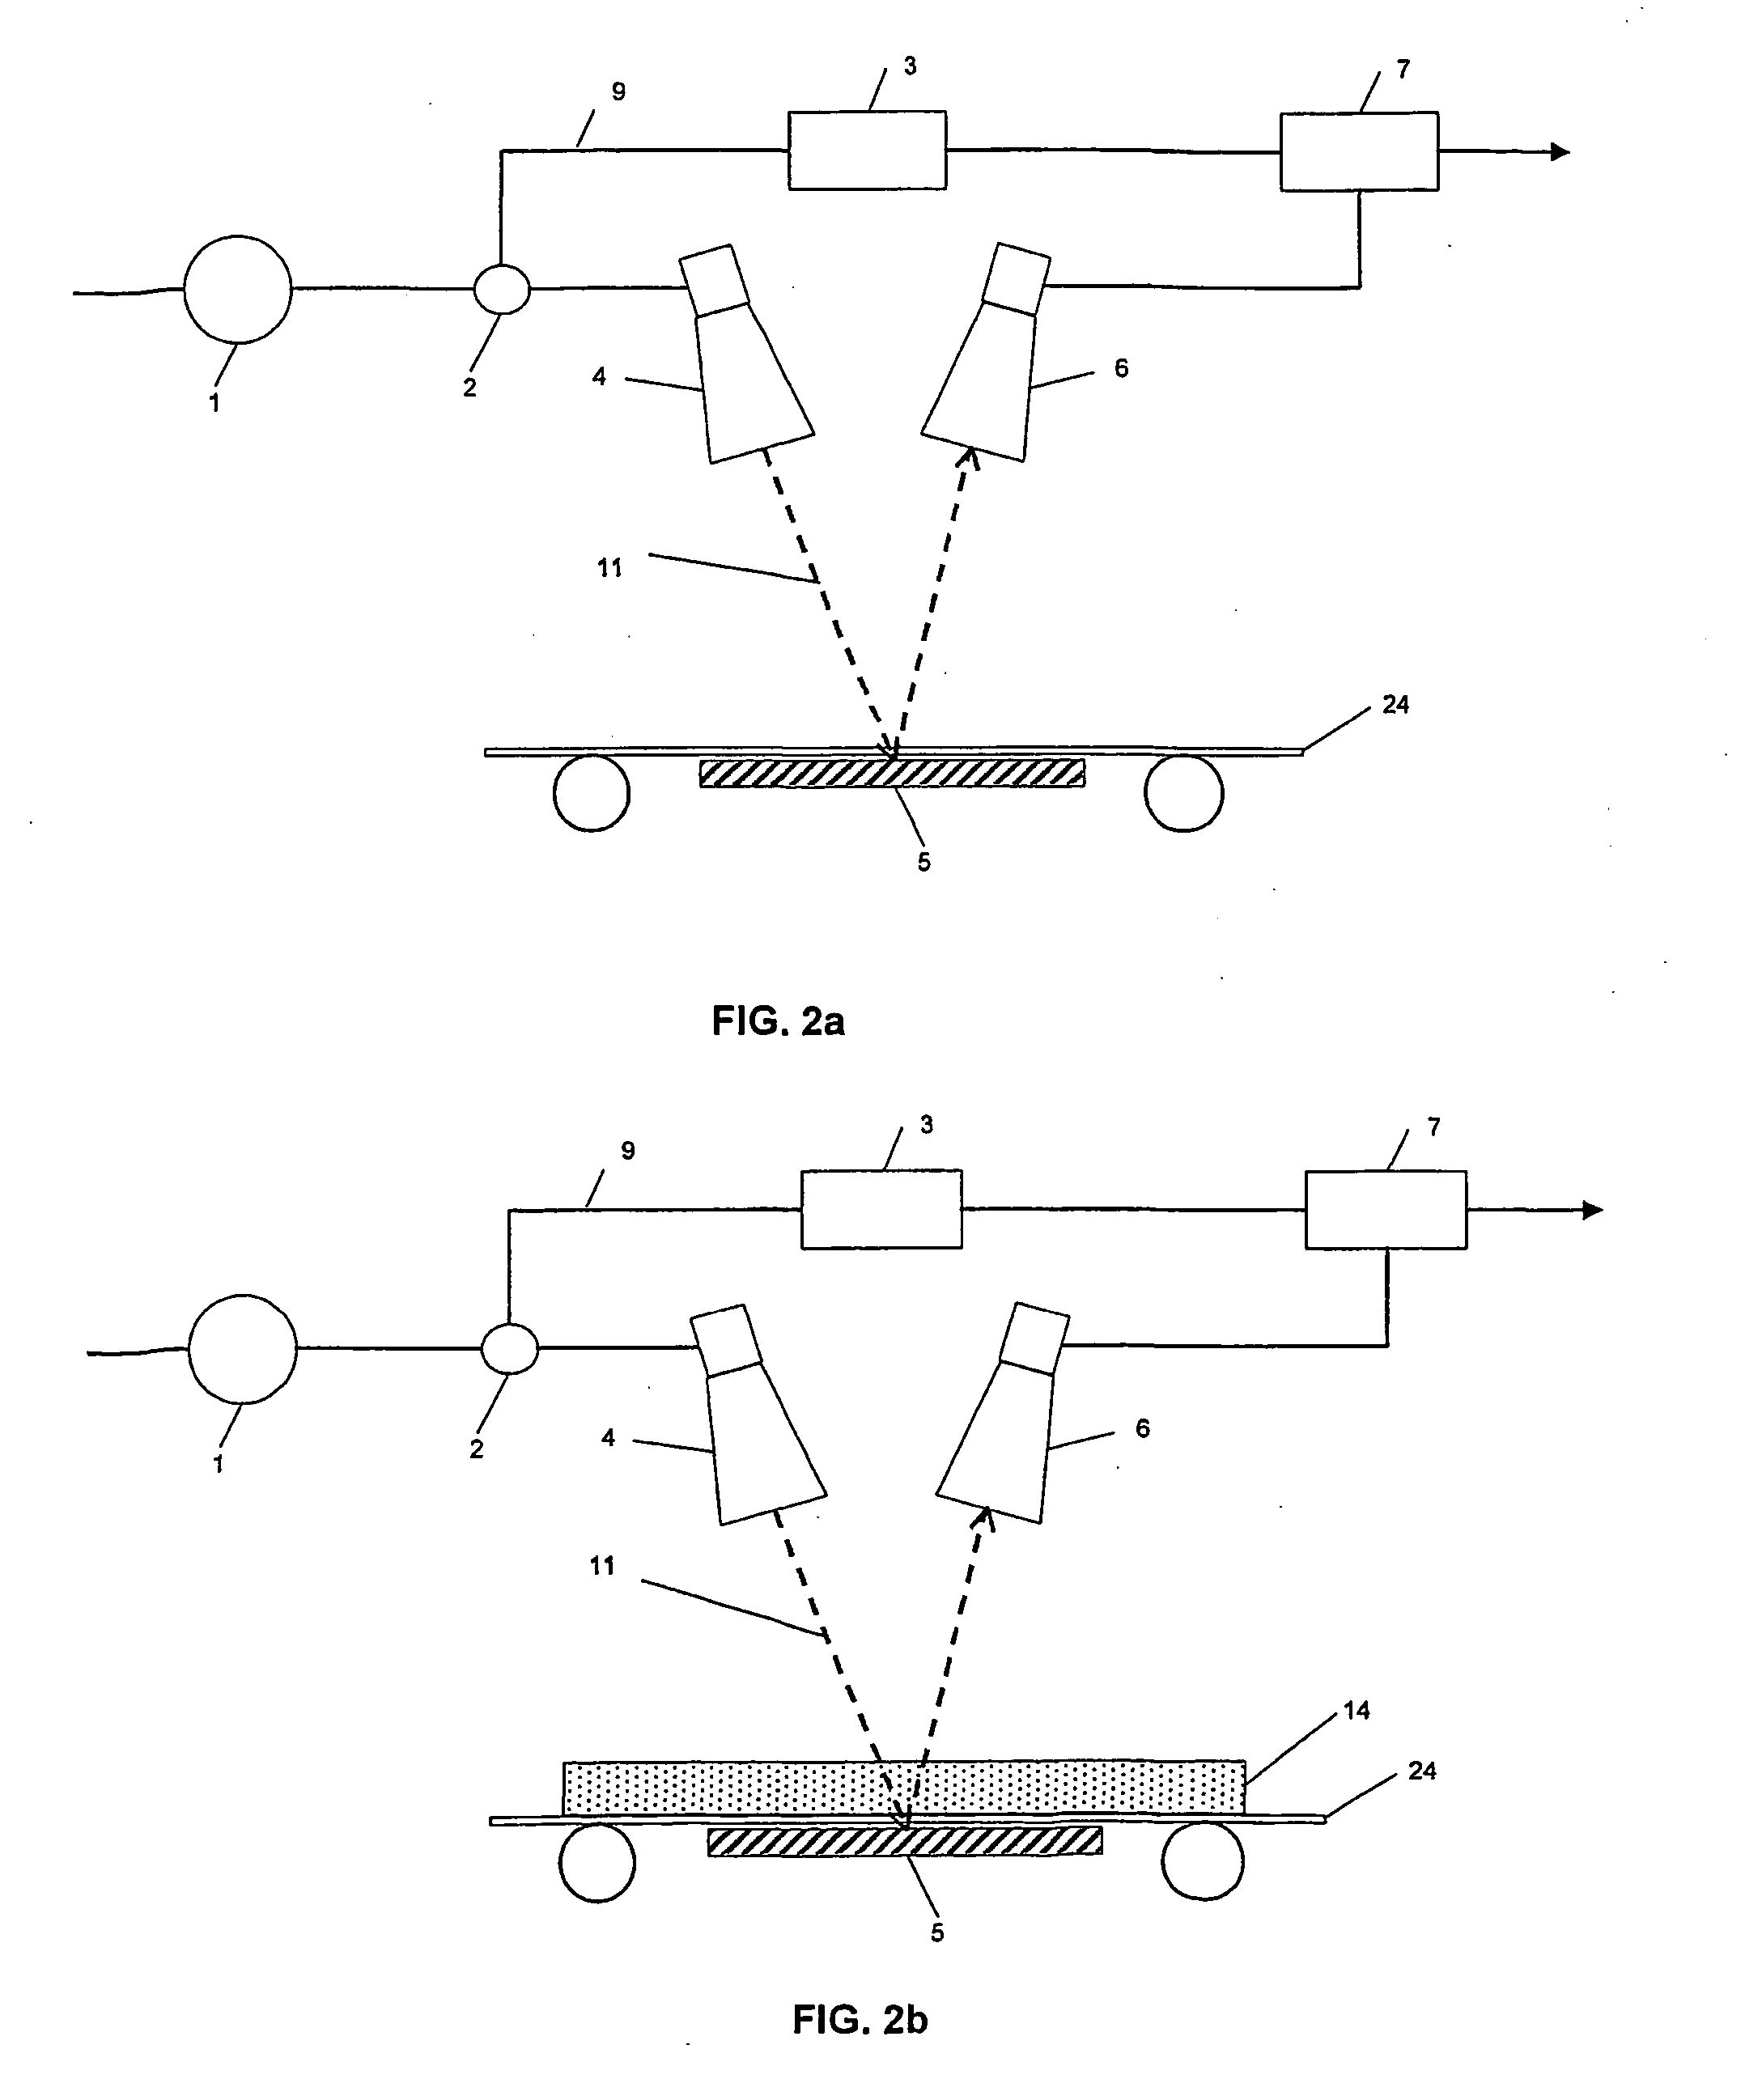 Apparatus and method for microwave determination of least one physical parameter of a substance